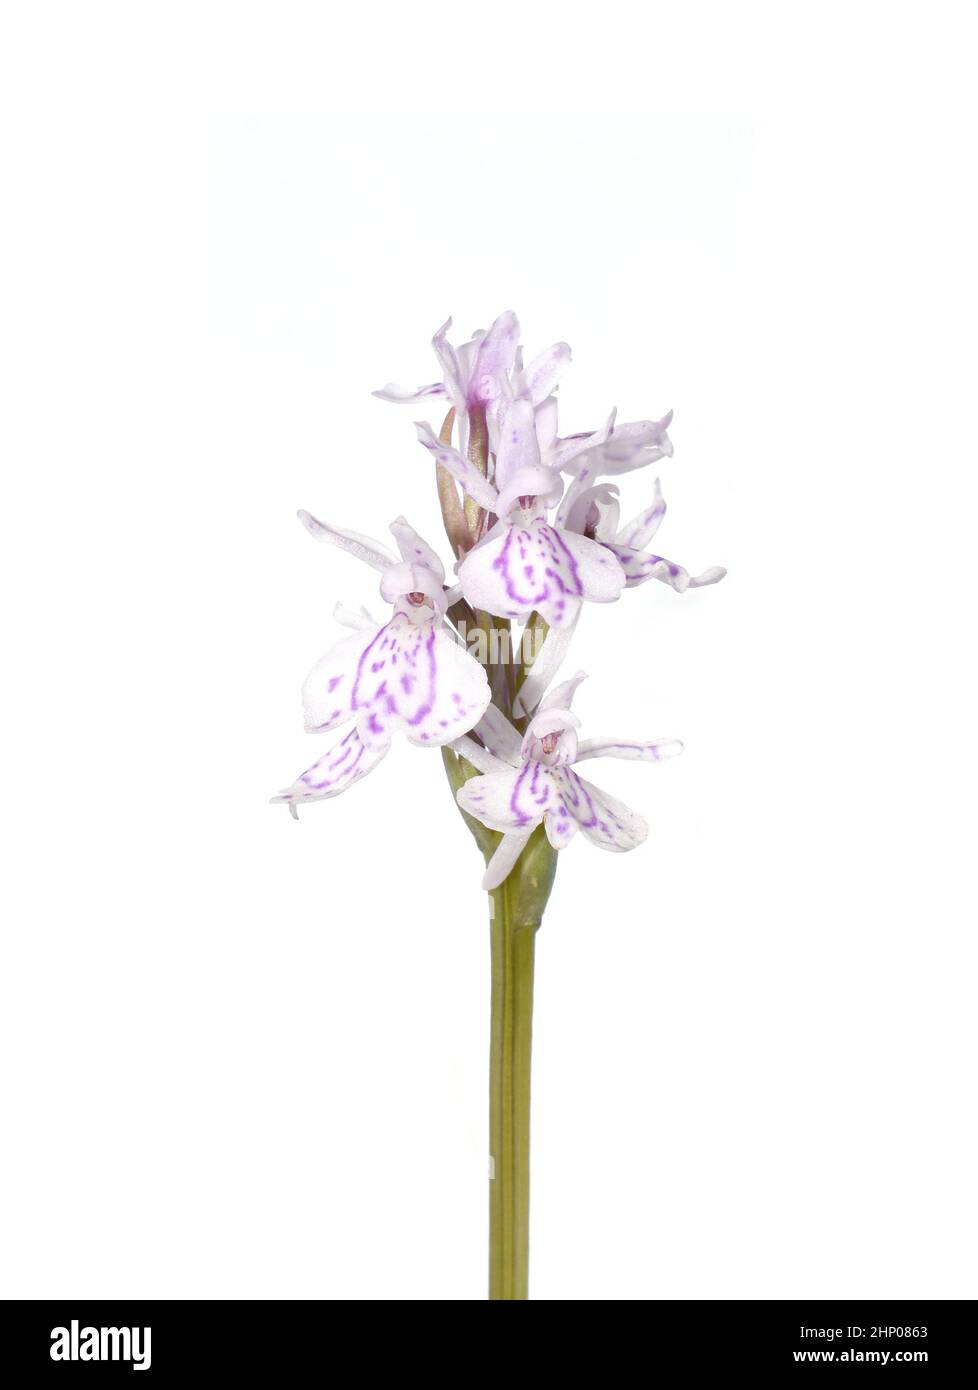 Close-up on flowers of heath spotted orchid Dactylorhiza maculata on white background Stock Photo